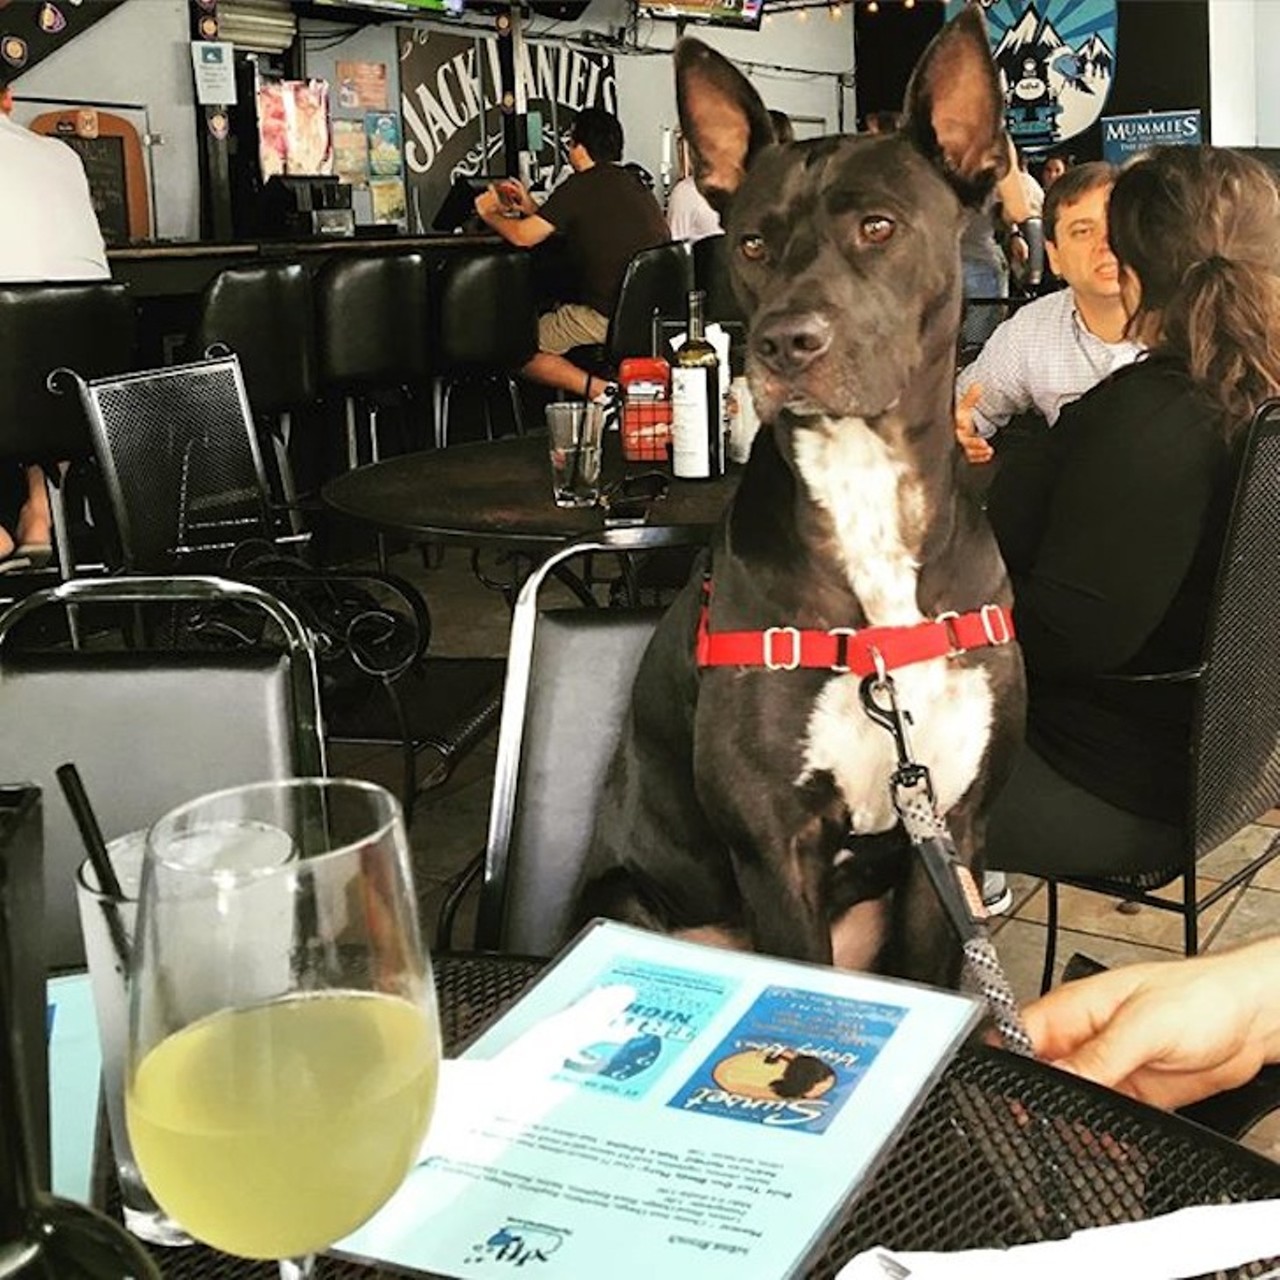 The Hammered Lamb
1235 N. Orange Ave. | 407-704-3200
This cozy neighborhood tavern across from Lake Ivanhoe encourages four-legged friends and an appetite for great food and drinks. What&#146;s better than that?
Photo via zmosbarger/Instagram